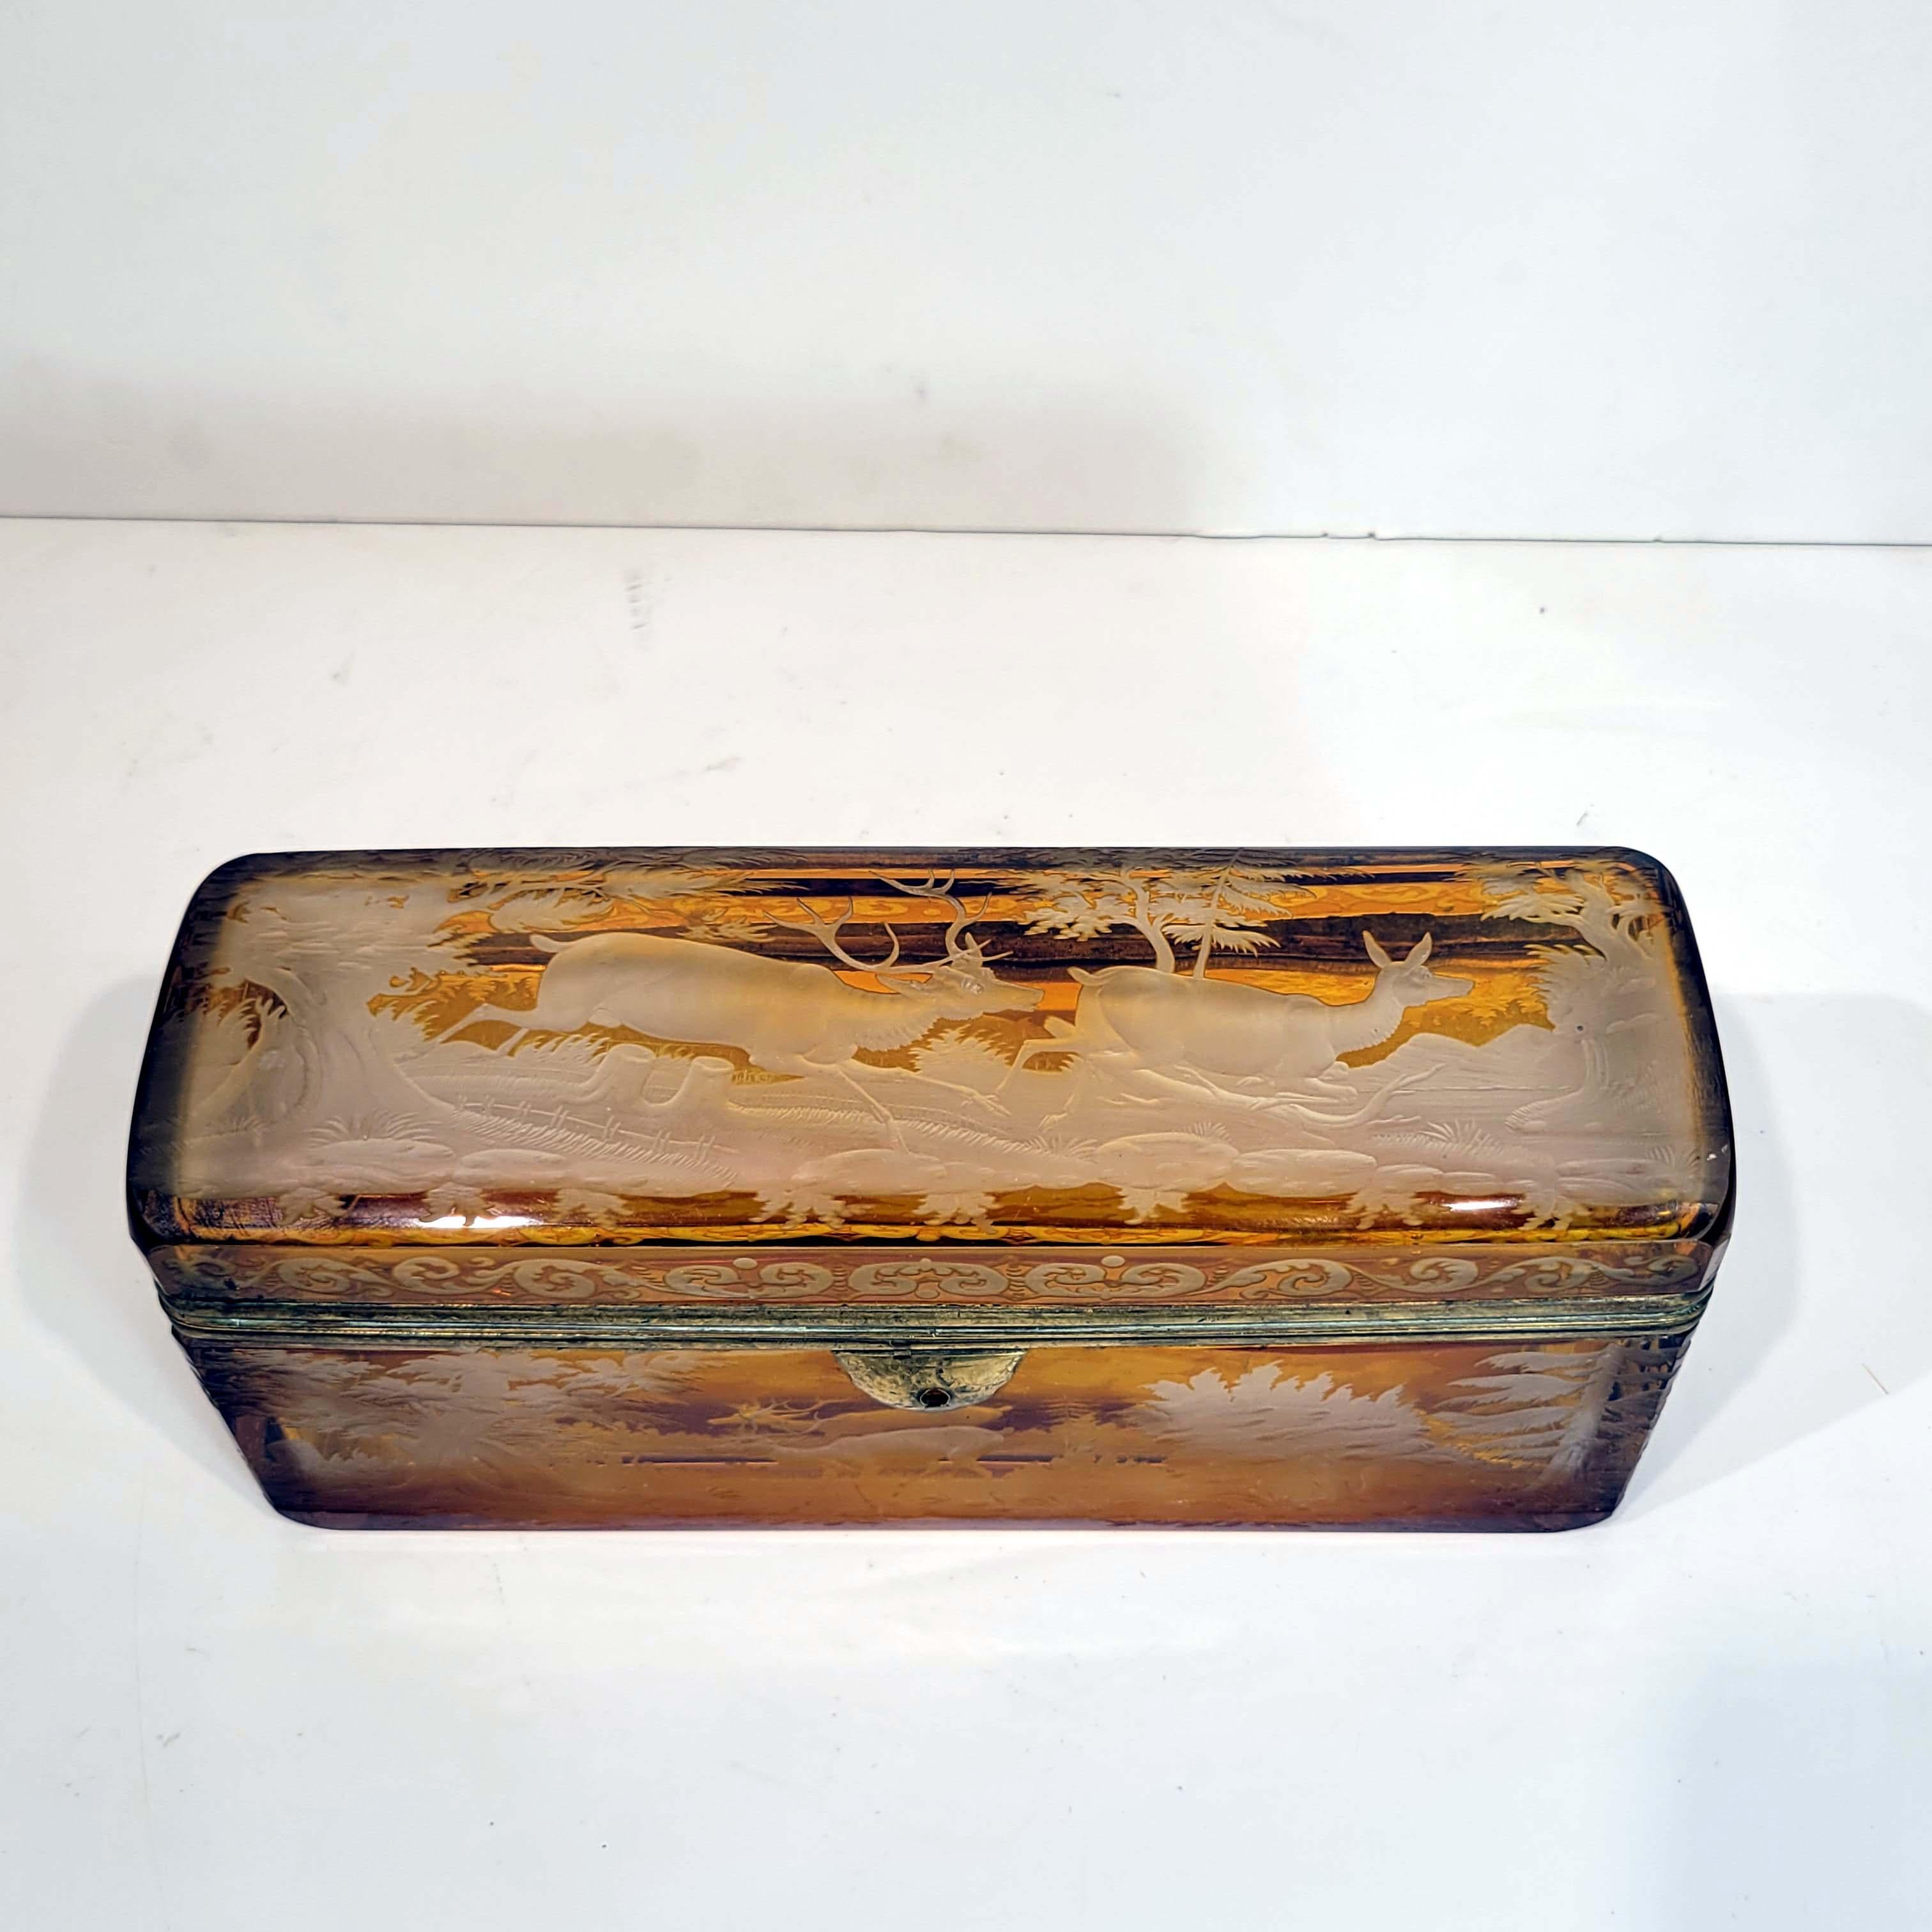 A stunning and rare 19th century Bohemian intaglio cut to clear footed casket, perfect for storing letters on your writing desk or place among your collection for all to see. This large amber box is one huge intaglio cut hunting scene displaying the